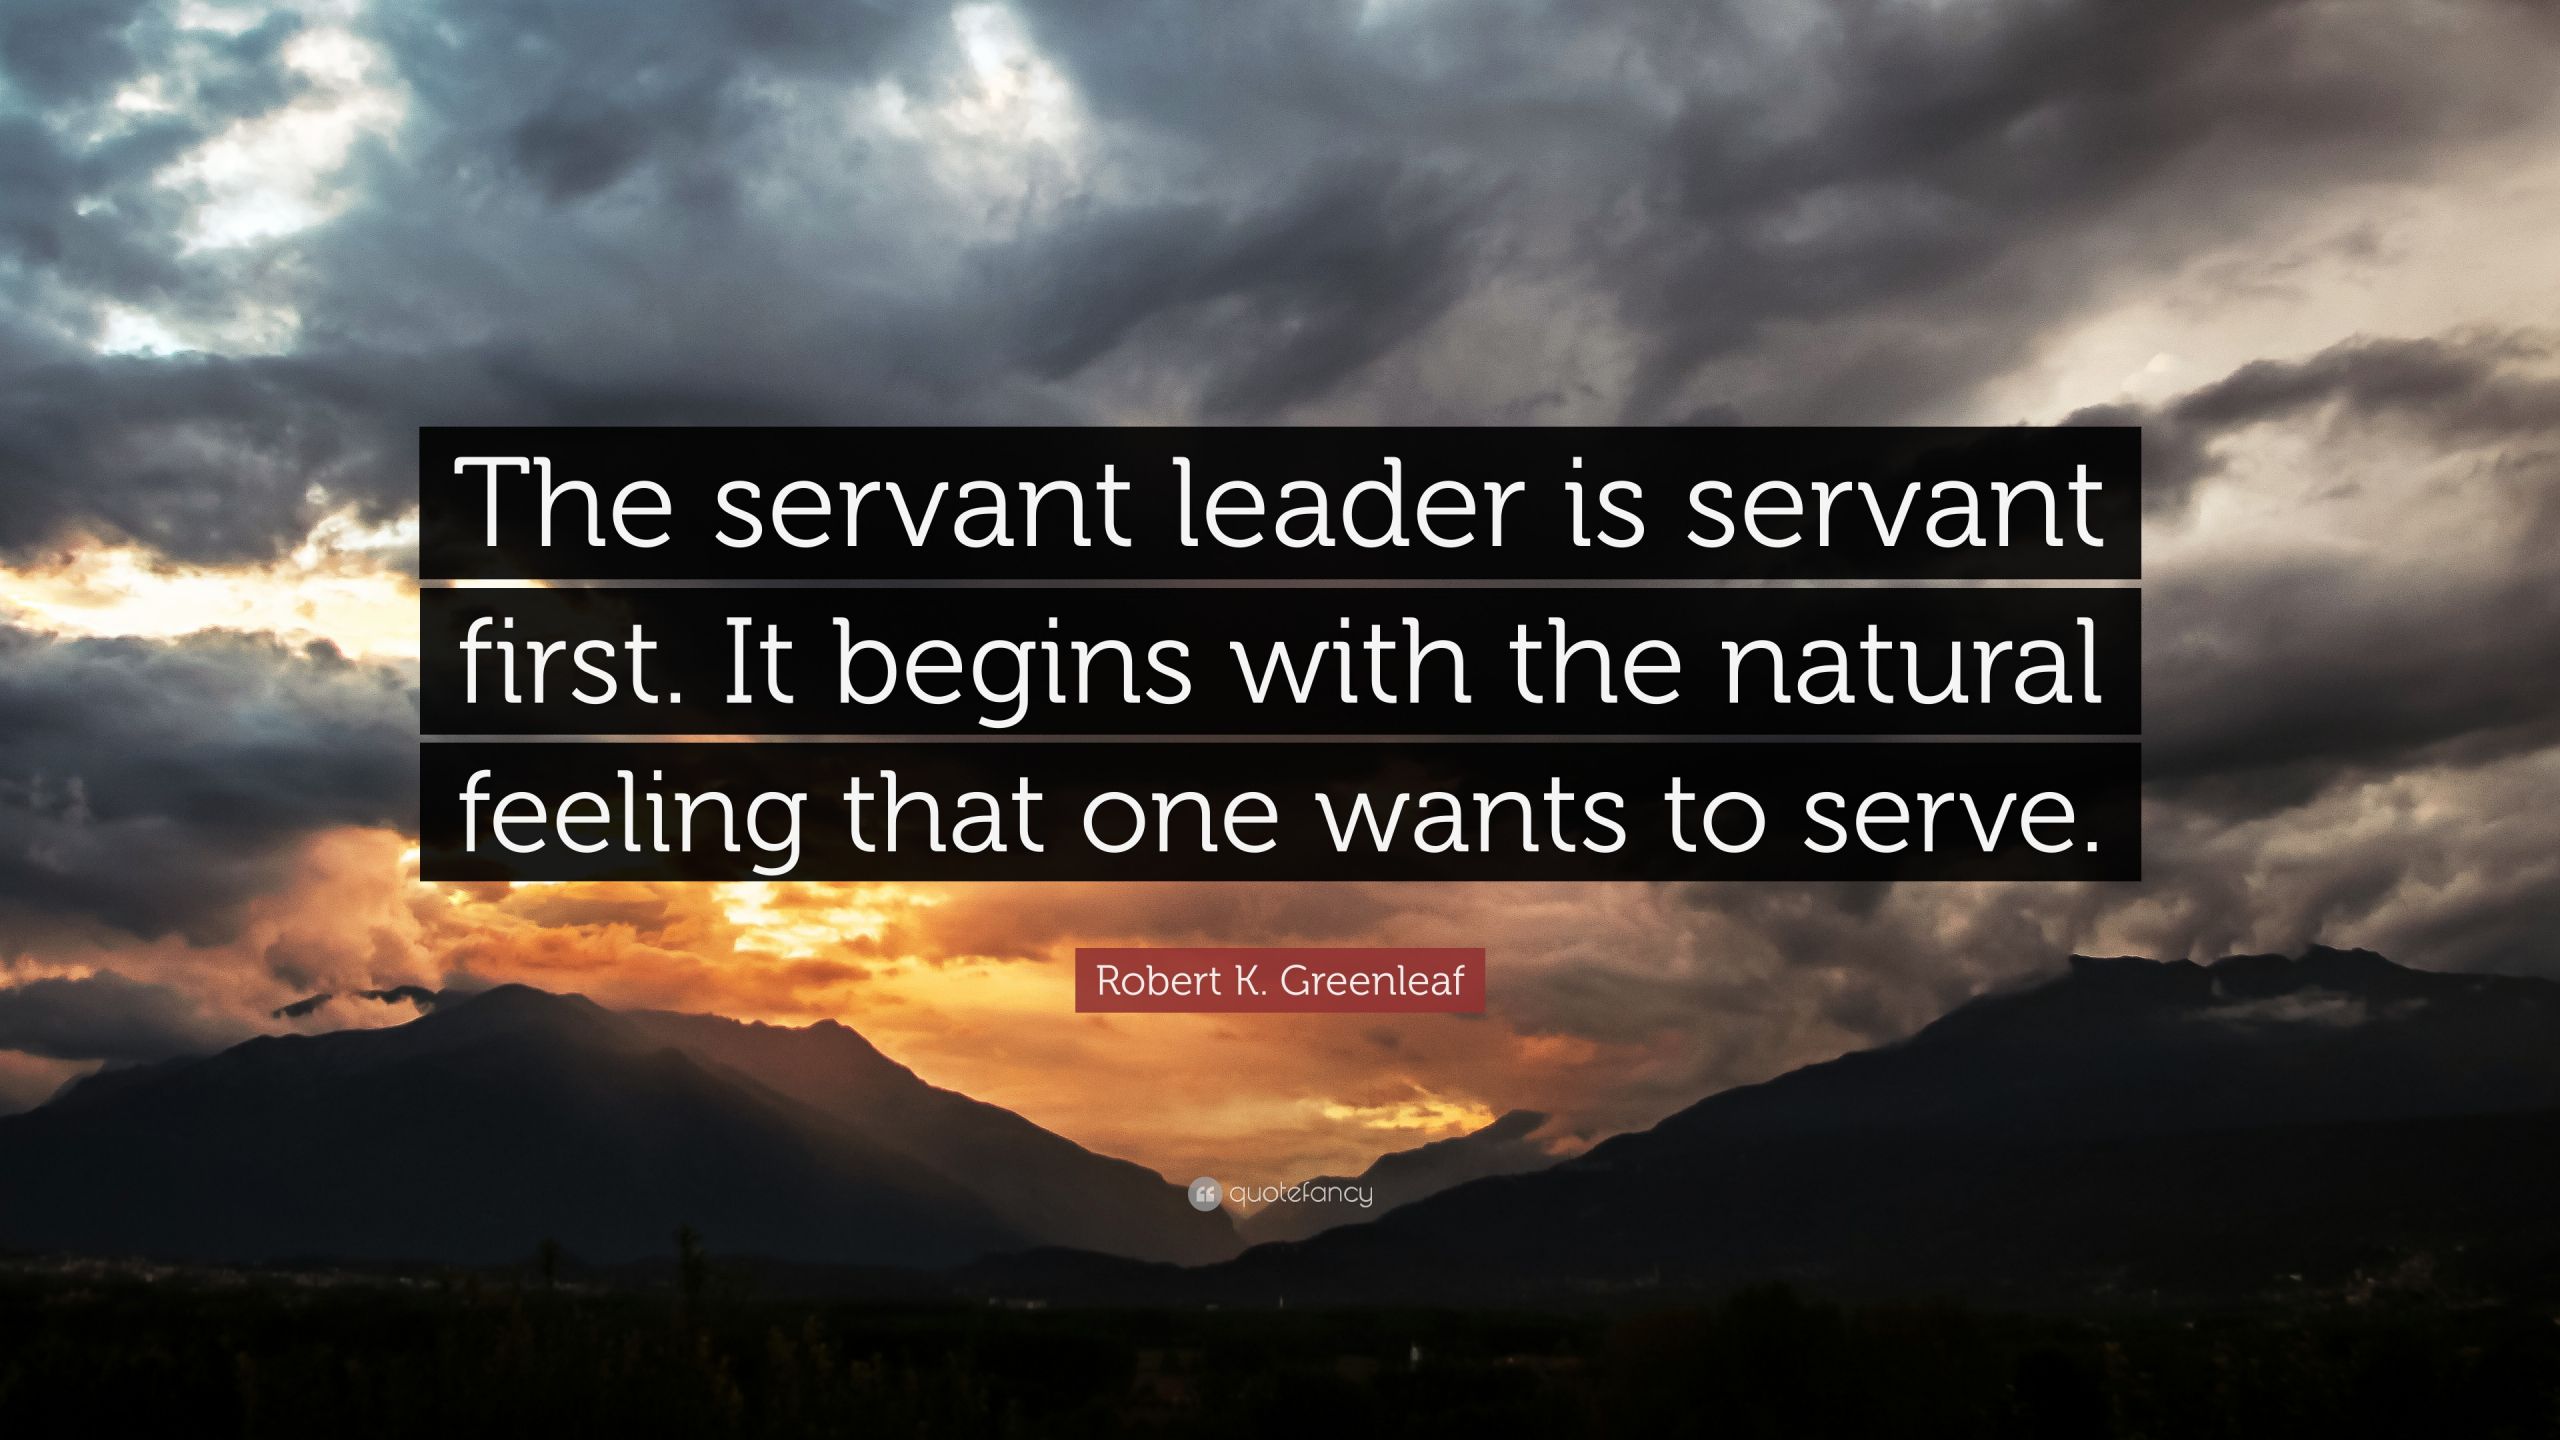 Quotes About Servant Leadership
 Robert K Greenleaf Quotes 22 wallpapers Quotefancy